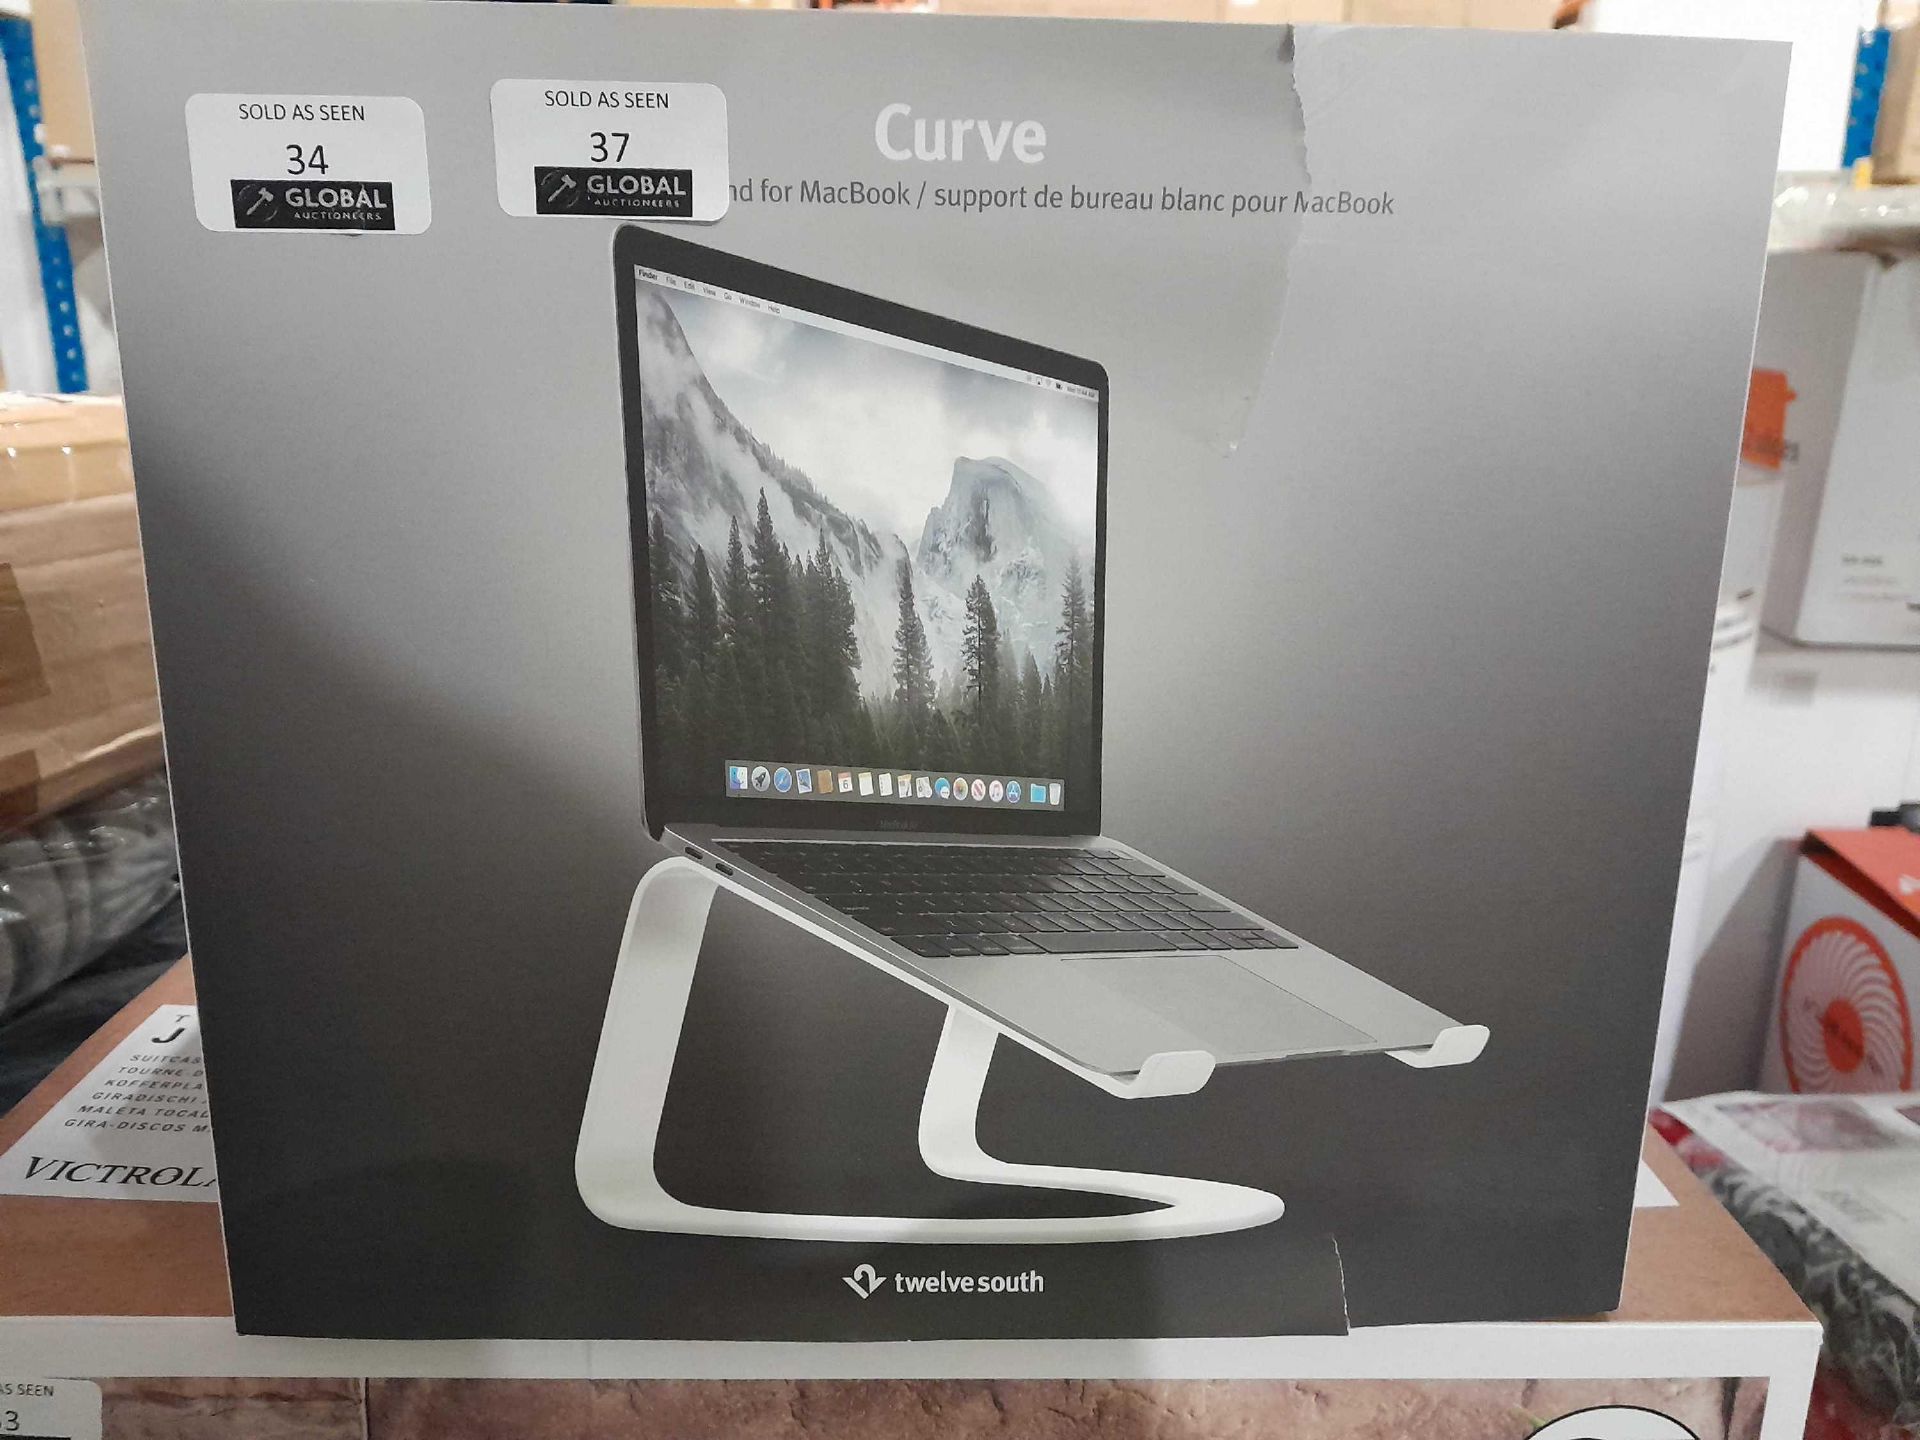 RRP £60 Boxed Twelvesouth Curve MacBook Stand - Image 2 of 3